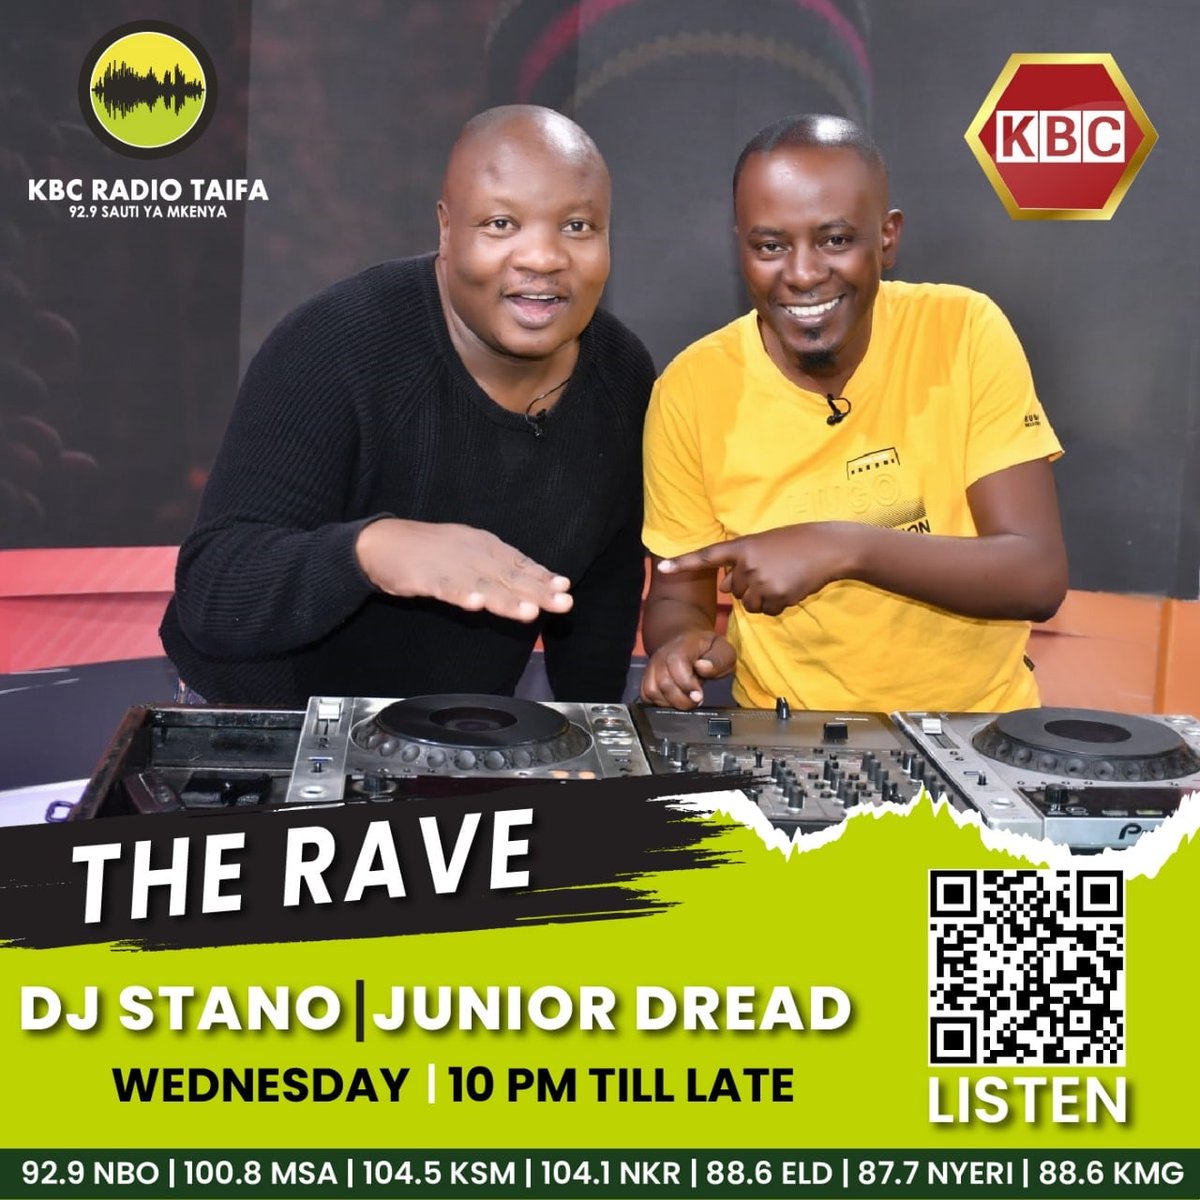 Deh pon #TheRaveKbc from 10pm with the General himseluf @juniordreadd & yours truly. 
Ya leo hufai kuhata aisee...
#ReggaeMusicSoNice